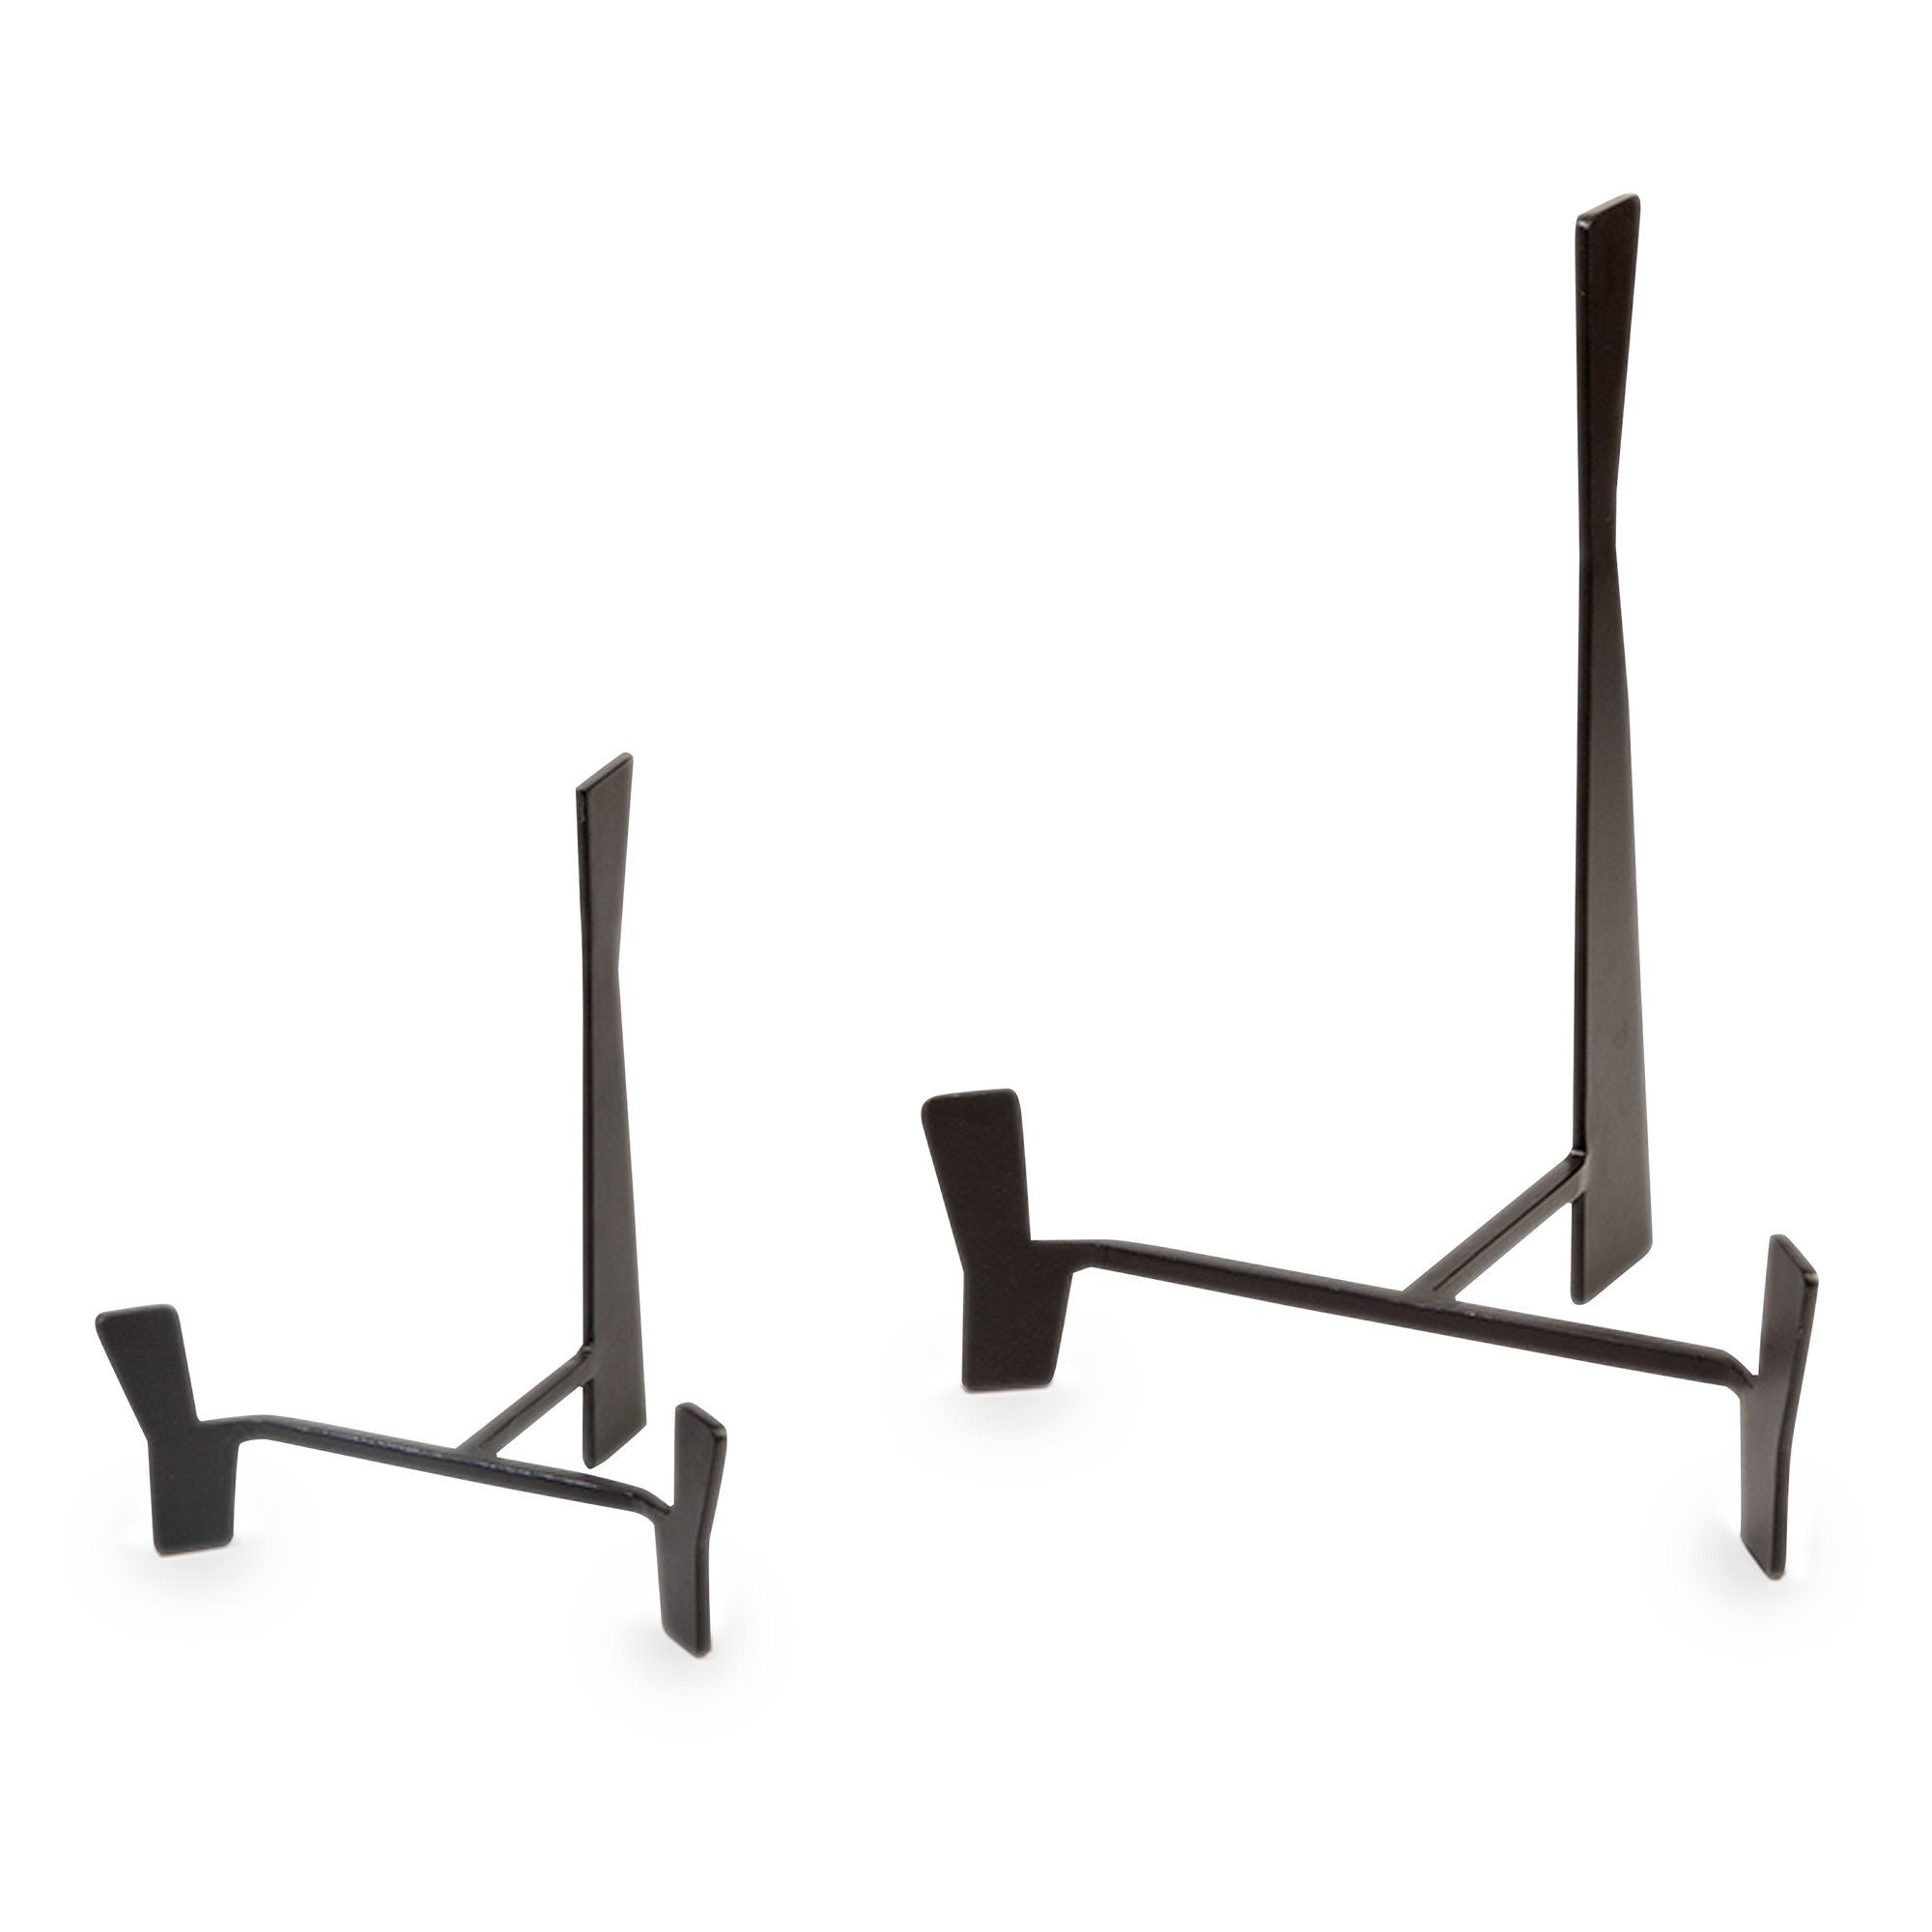 With a focus on minimalist design, the Iron Palte Stand features a black-brown powder coated iron finish.